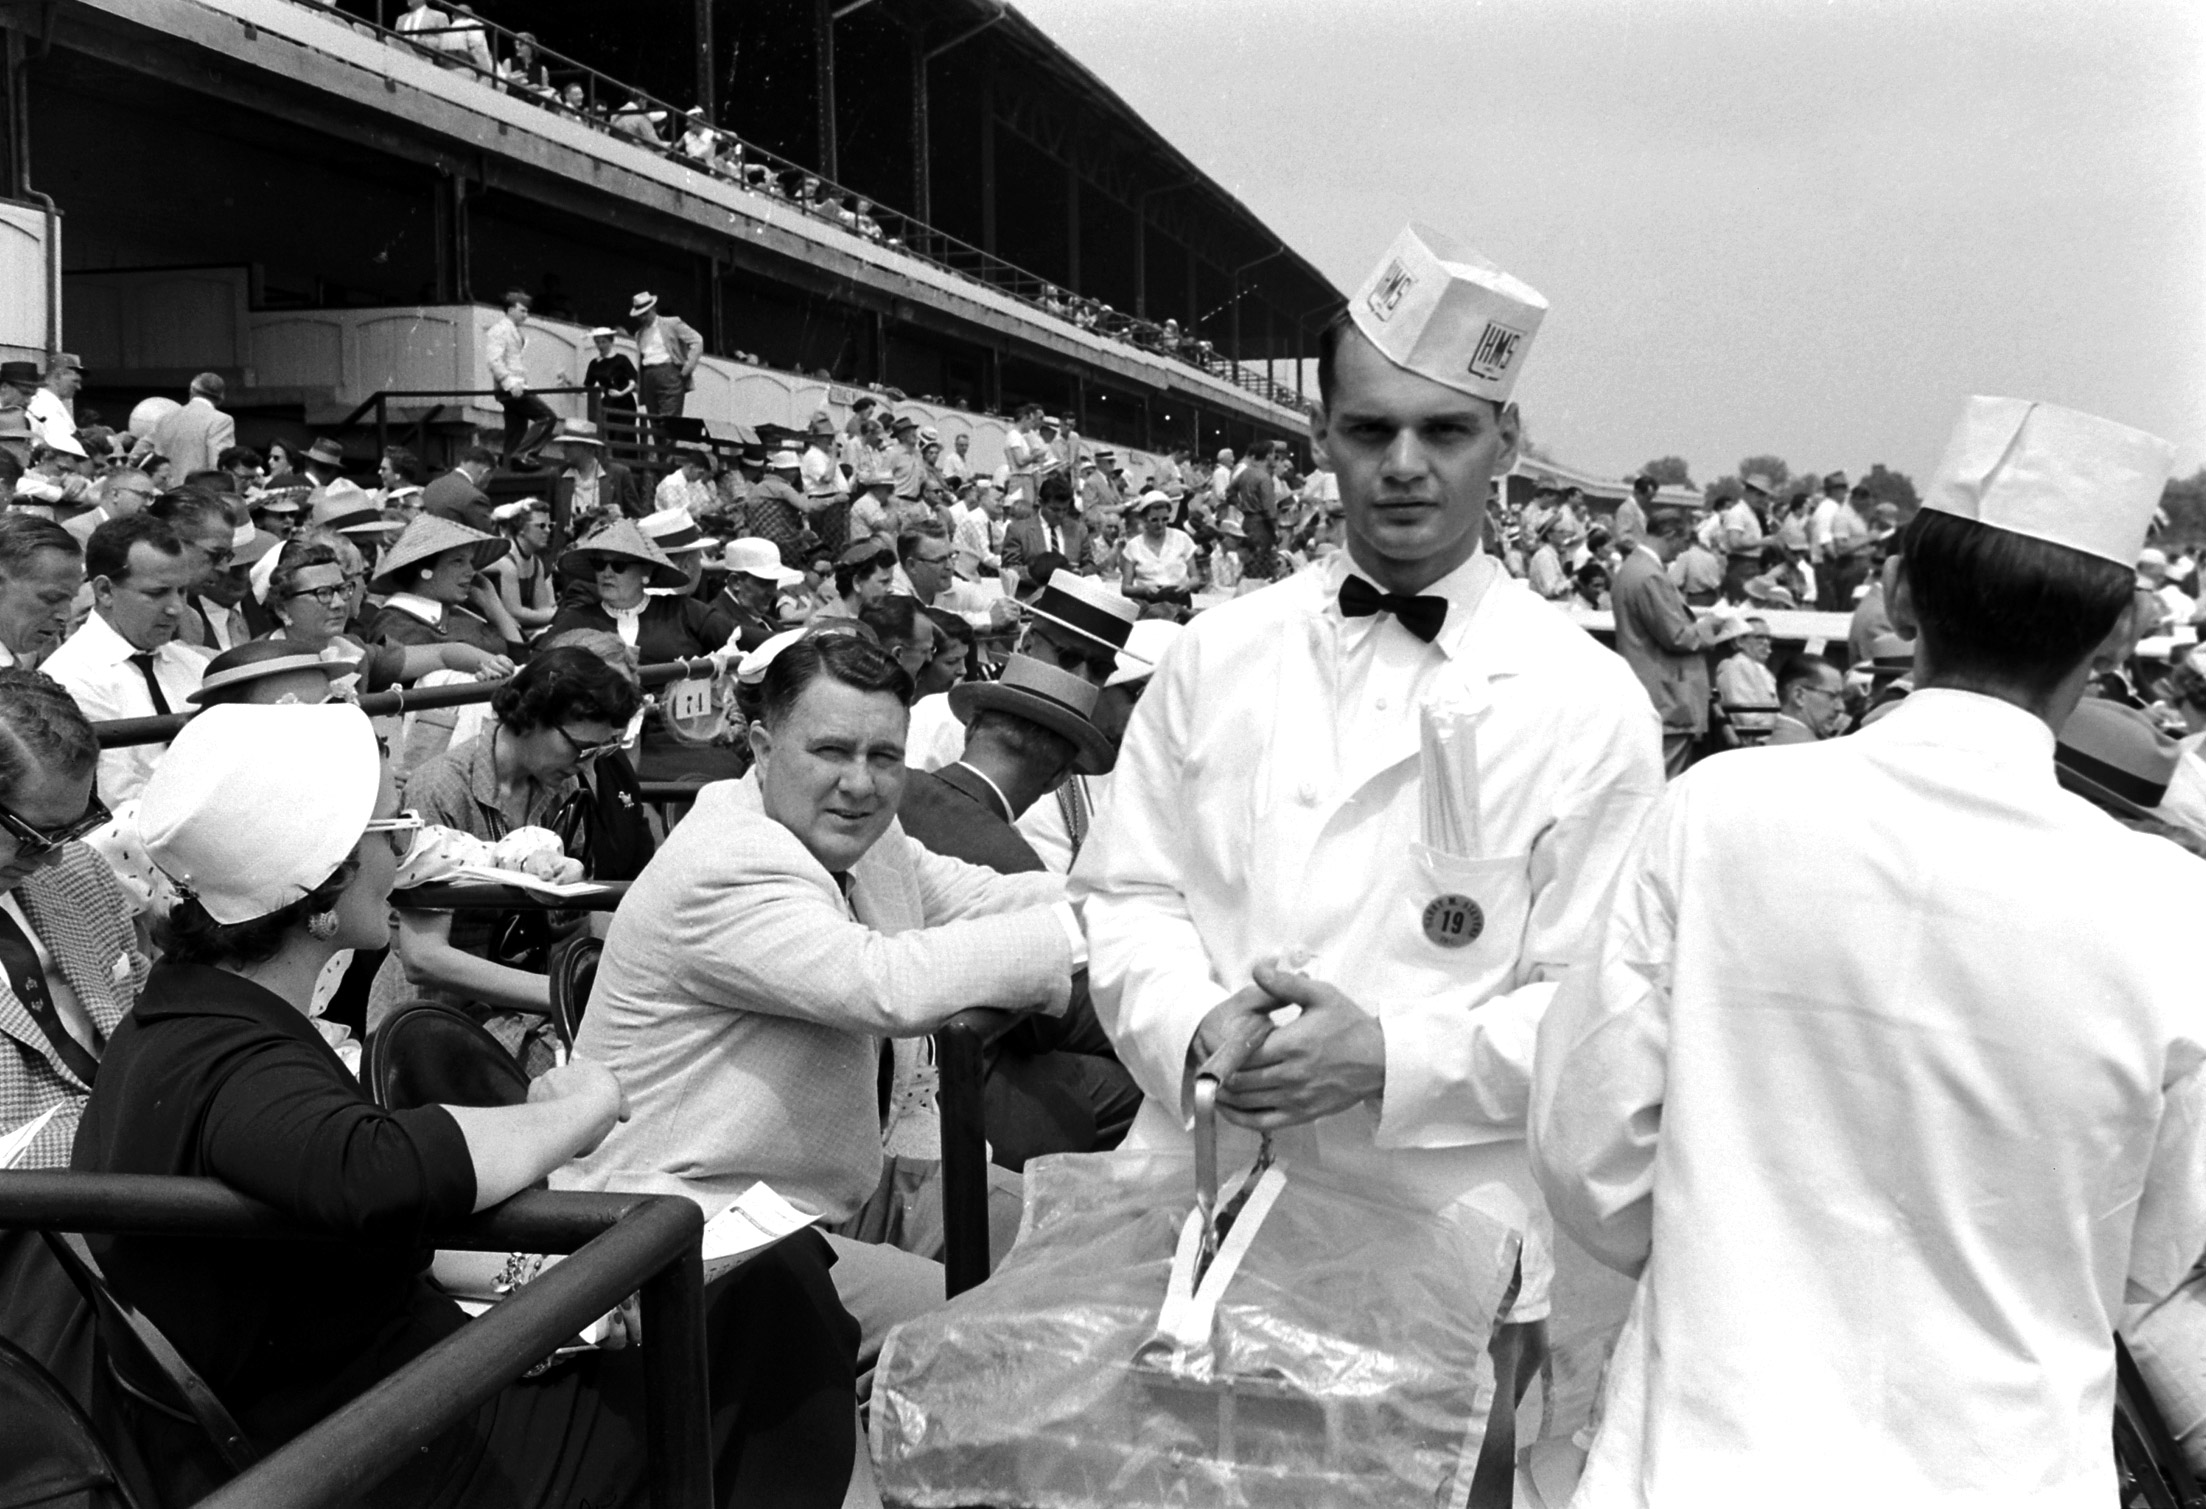 Waiters serve mint juleps to spectators at Churchill Downs on Derby day, 1960.